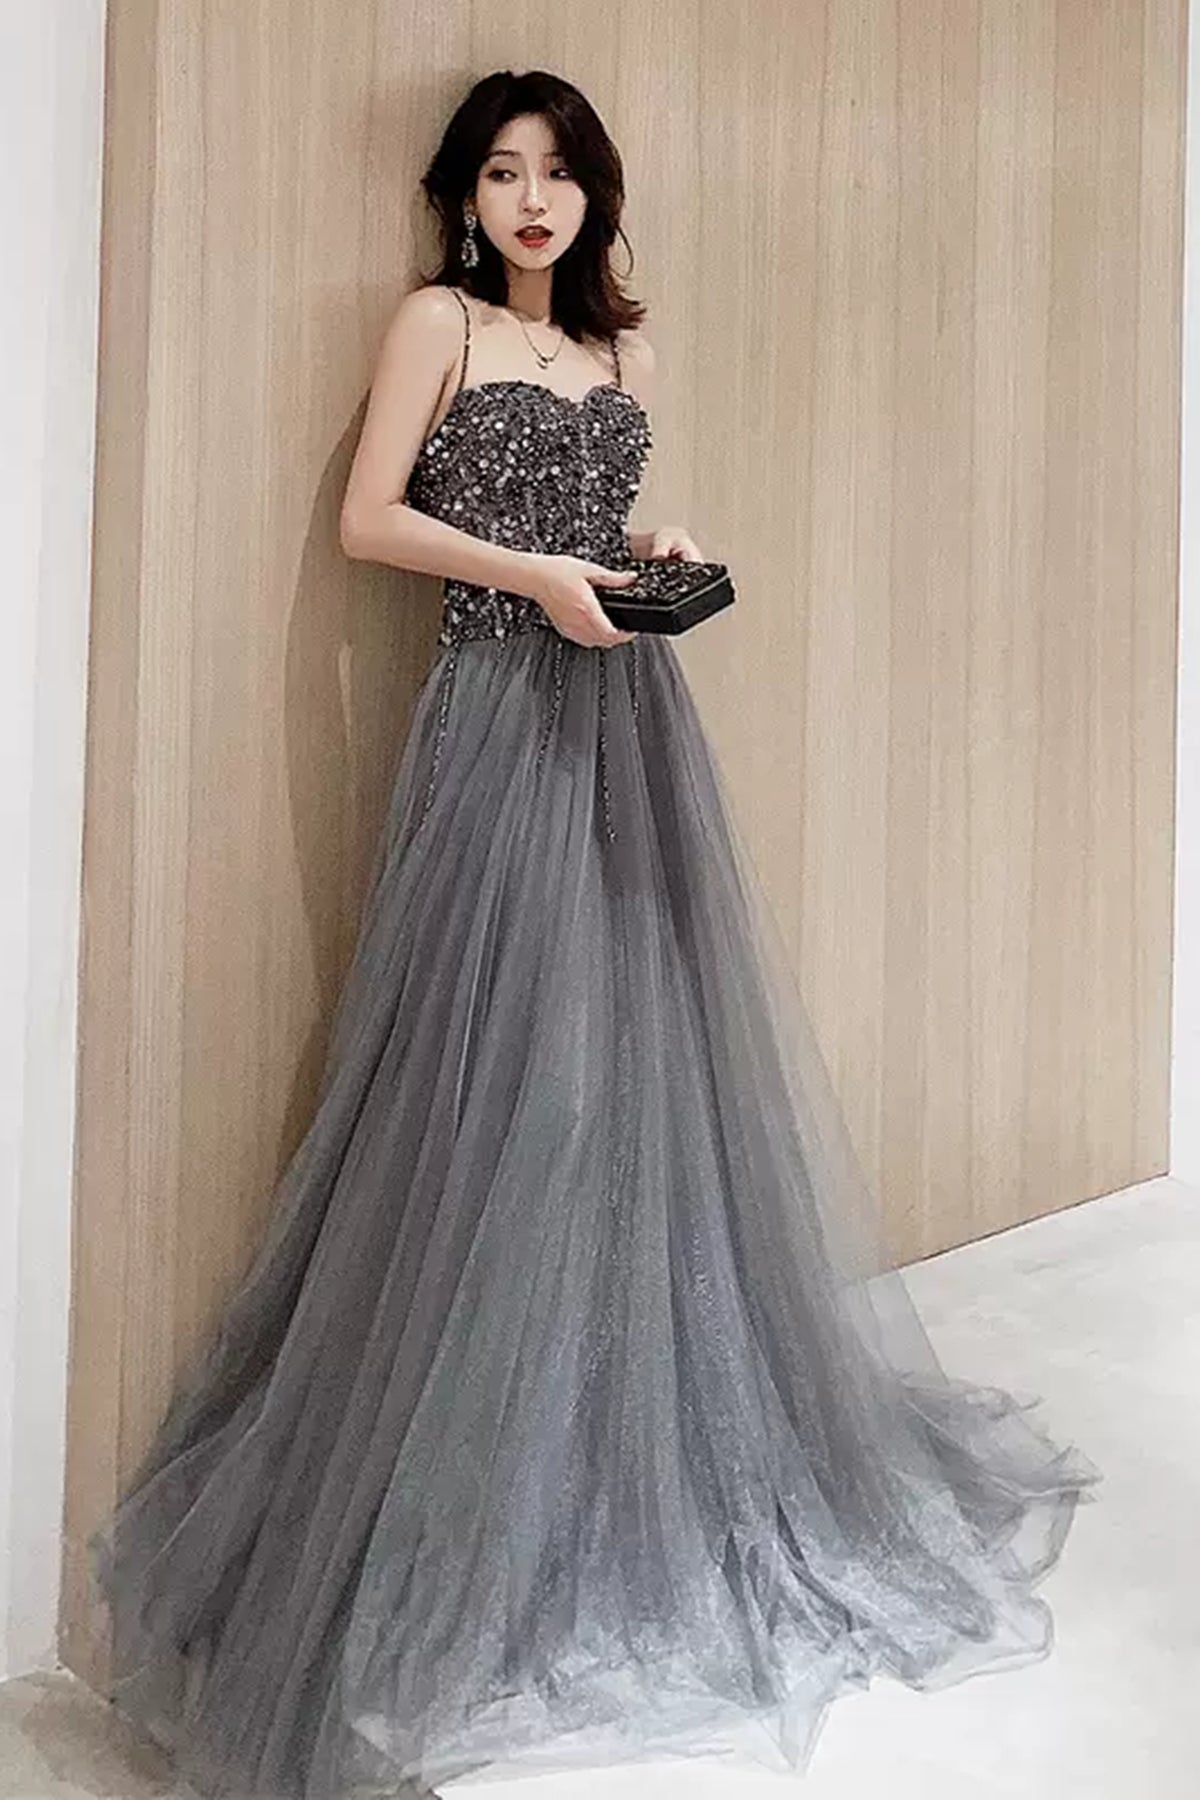 Sweetheart Neck Gray Sequins Beaded Tulle Long Prom Dresses, Grey Tulle Formal Graduation Evening Dresses WT1011